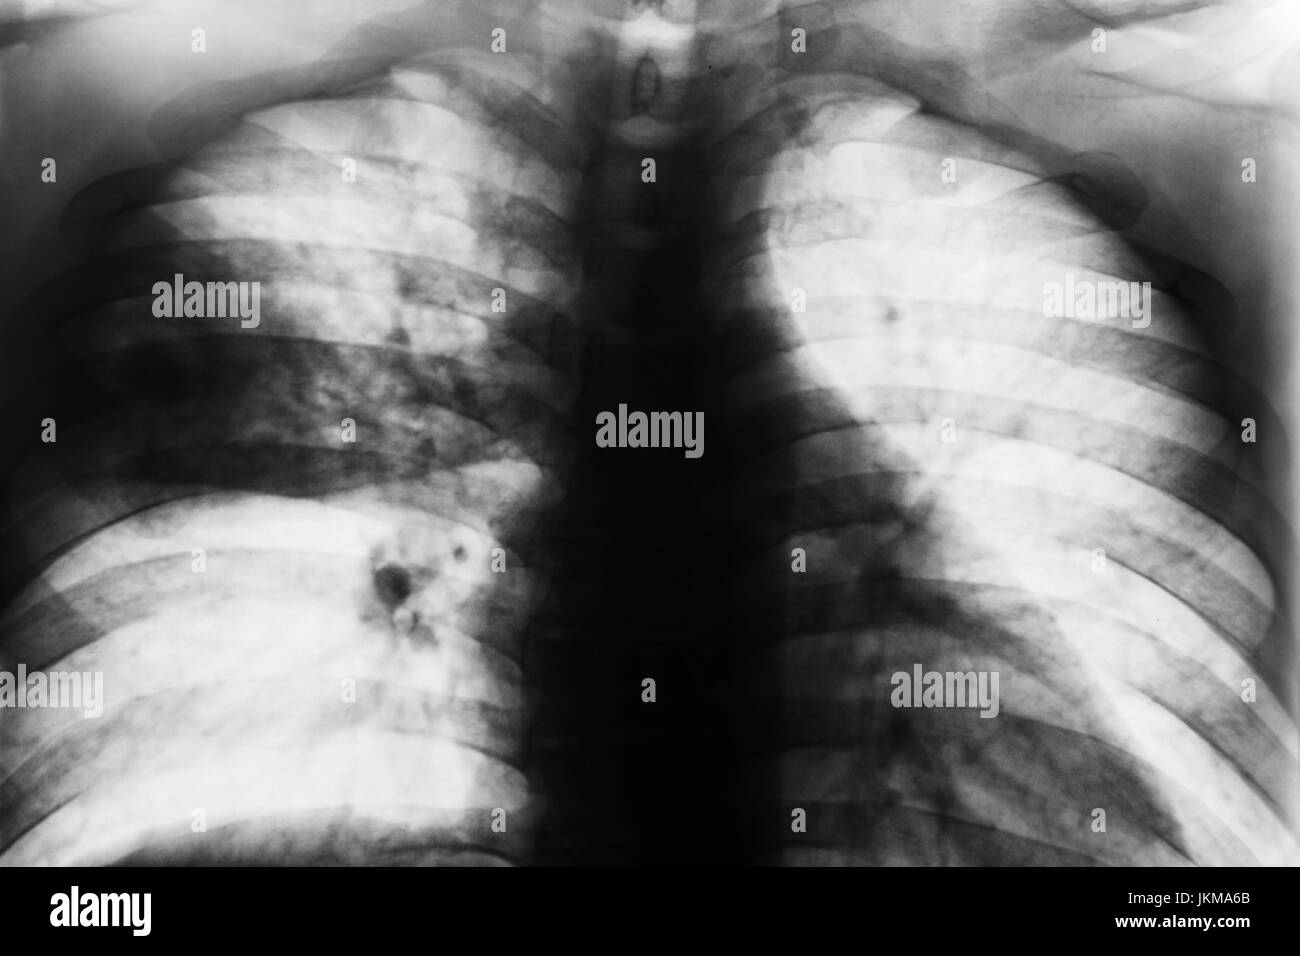 Lobar Pneumonia . Film chest x-ray show patchy infiltrate at right middle lung from Mycobacterium tuberculosis infection ( Pulmonary tuberculosis ) . Stock Photo